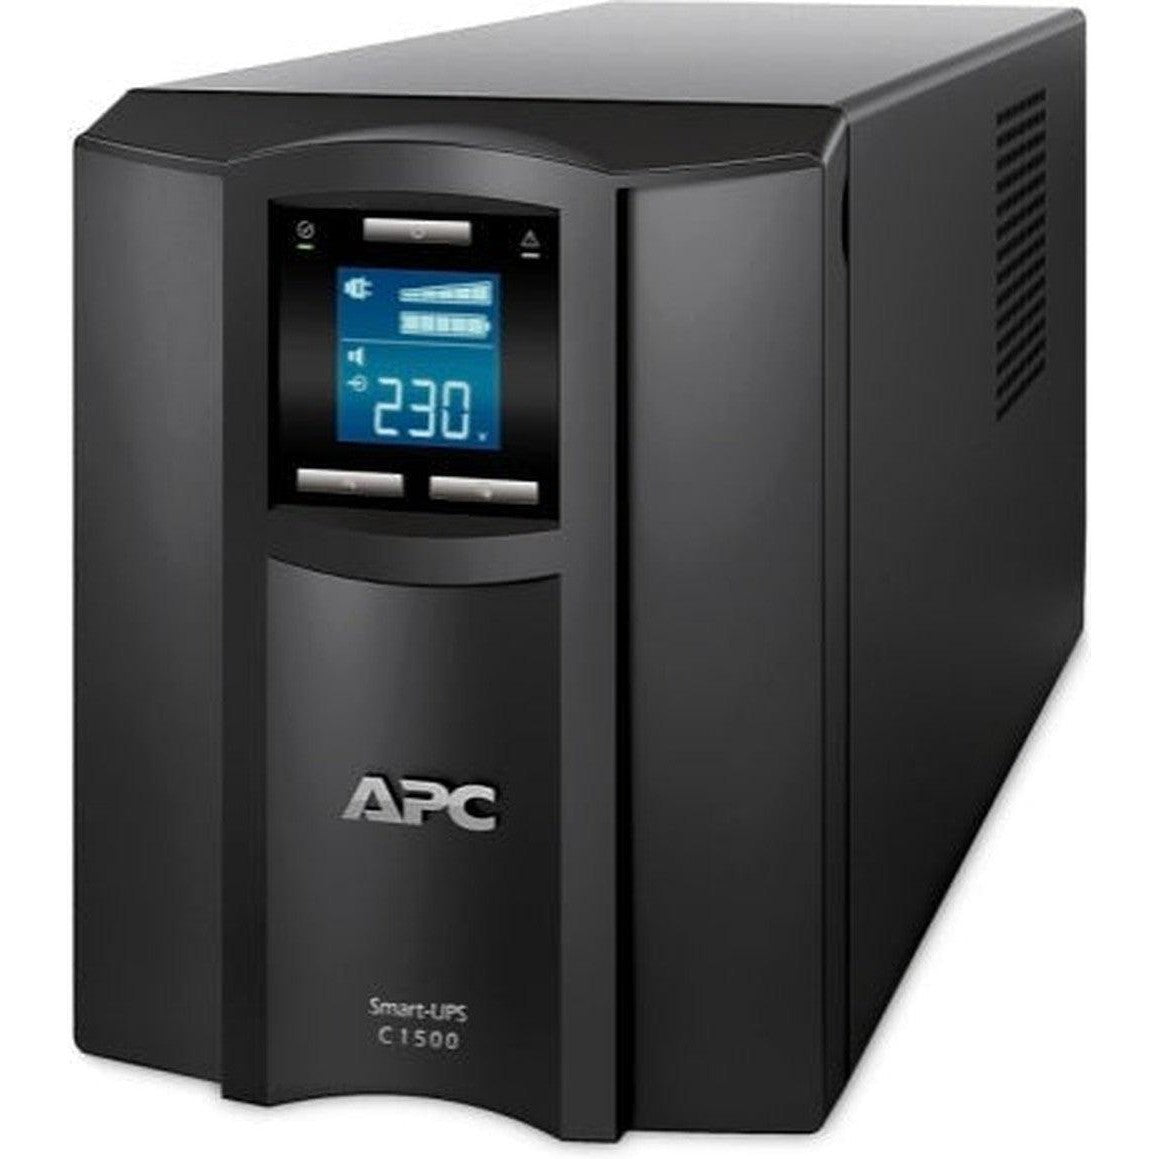 Apc Smart-Ups C, Line Interactive, 1500Va, Tower,30V, 8X Iec C13 Outlets, Usb And Serial Communication, Avr, Graphic Lcd-Ups-APC-Star Light Kuwait